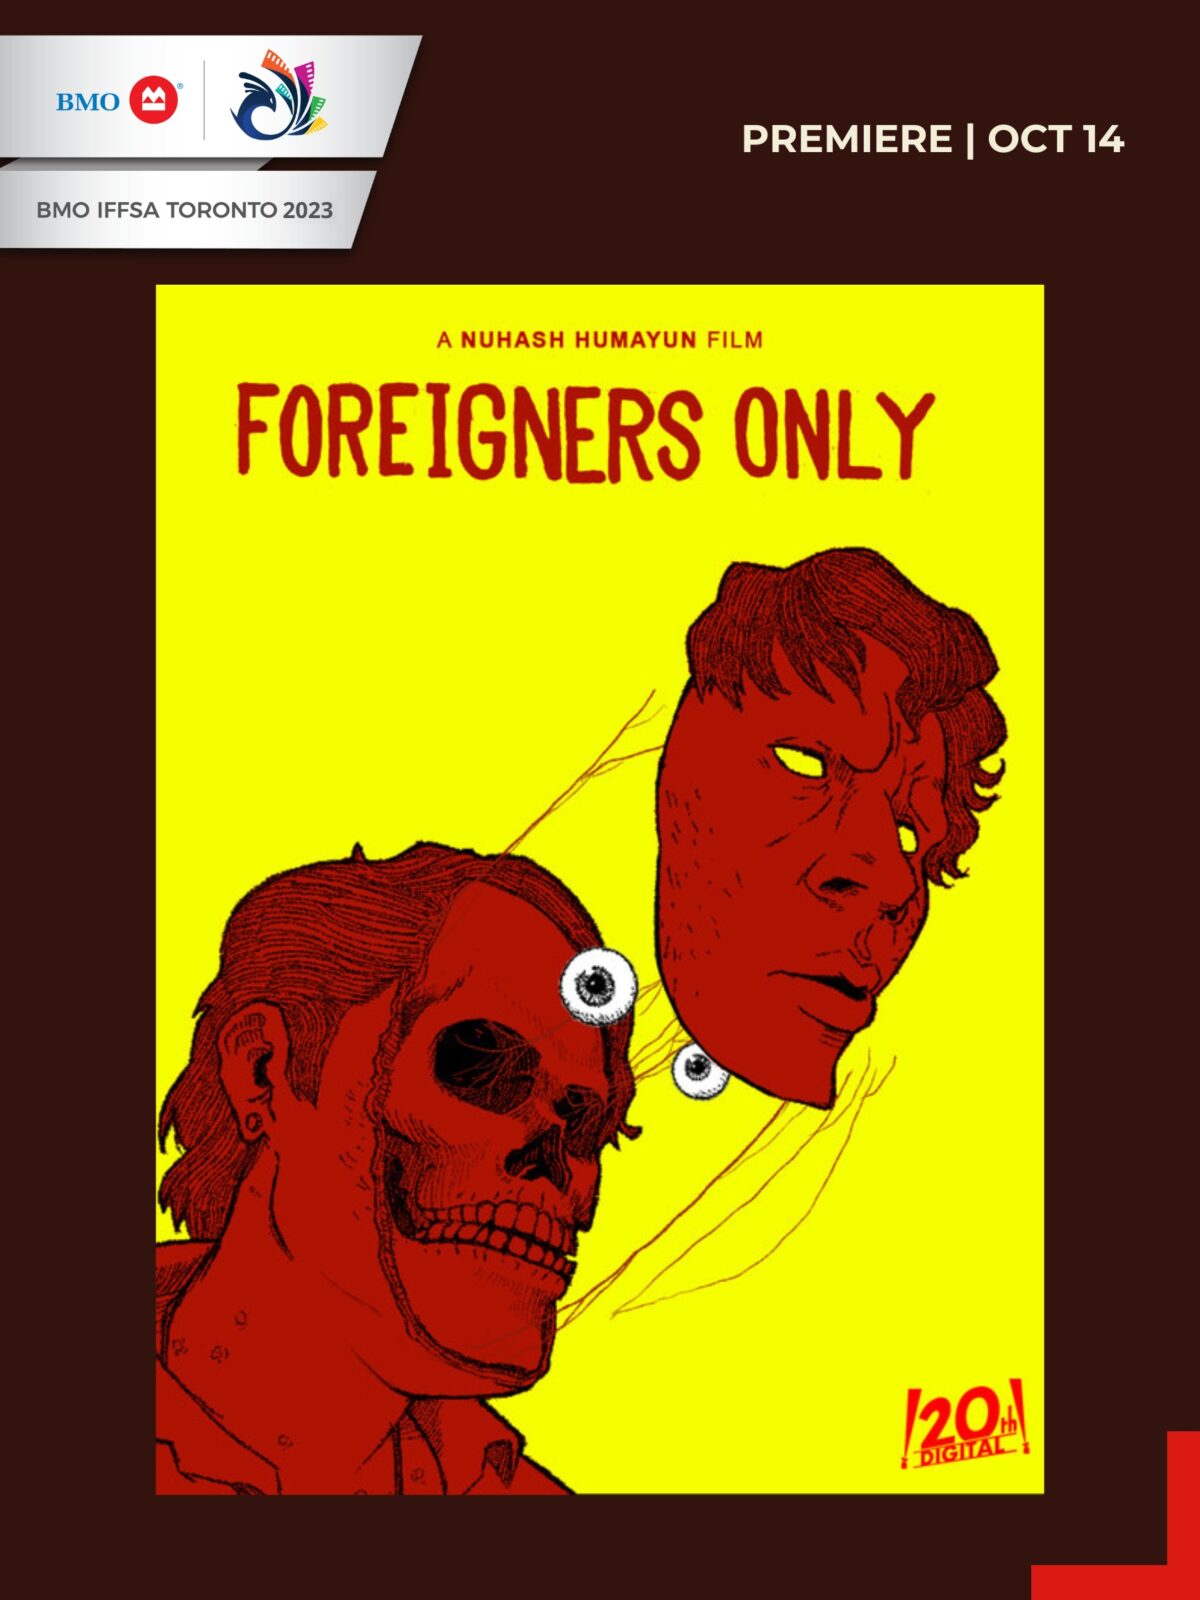 FOREIGNERS ONLY